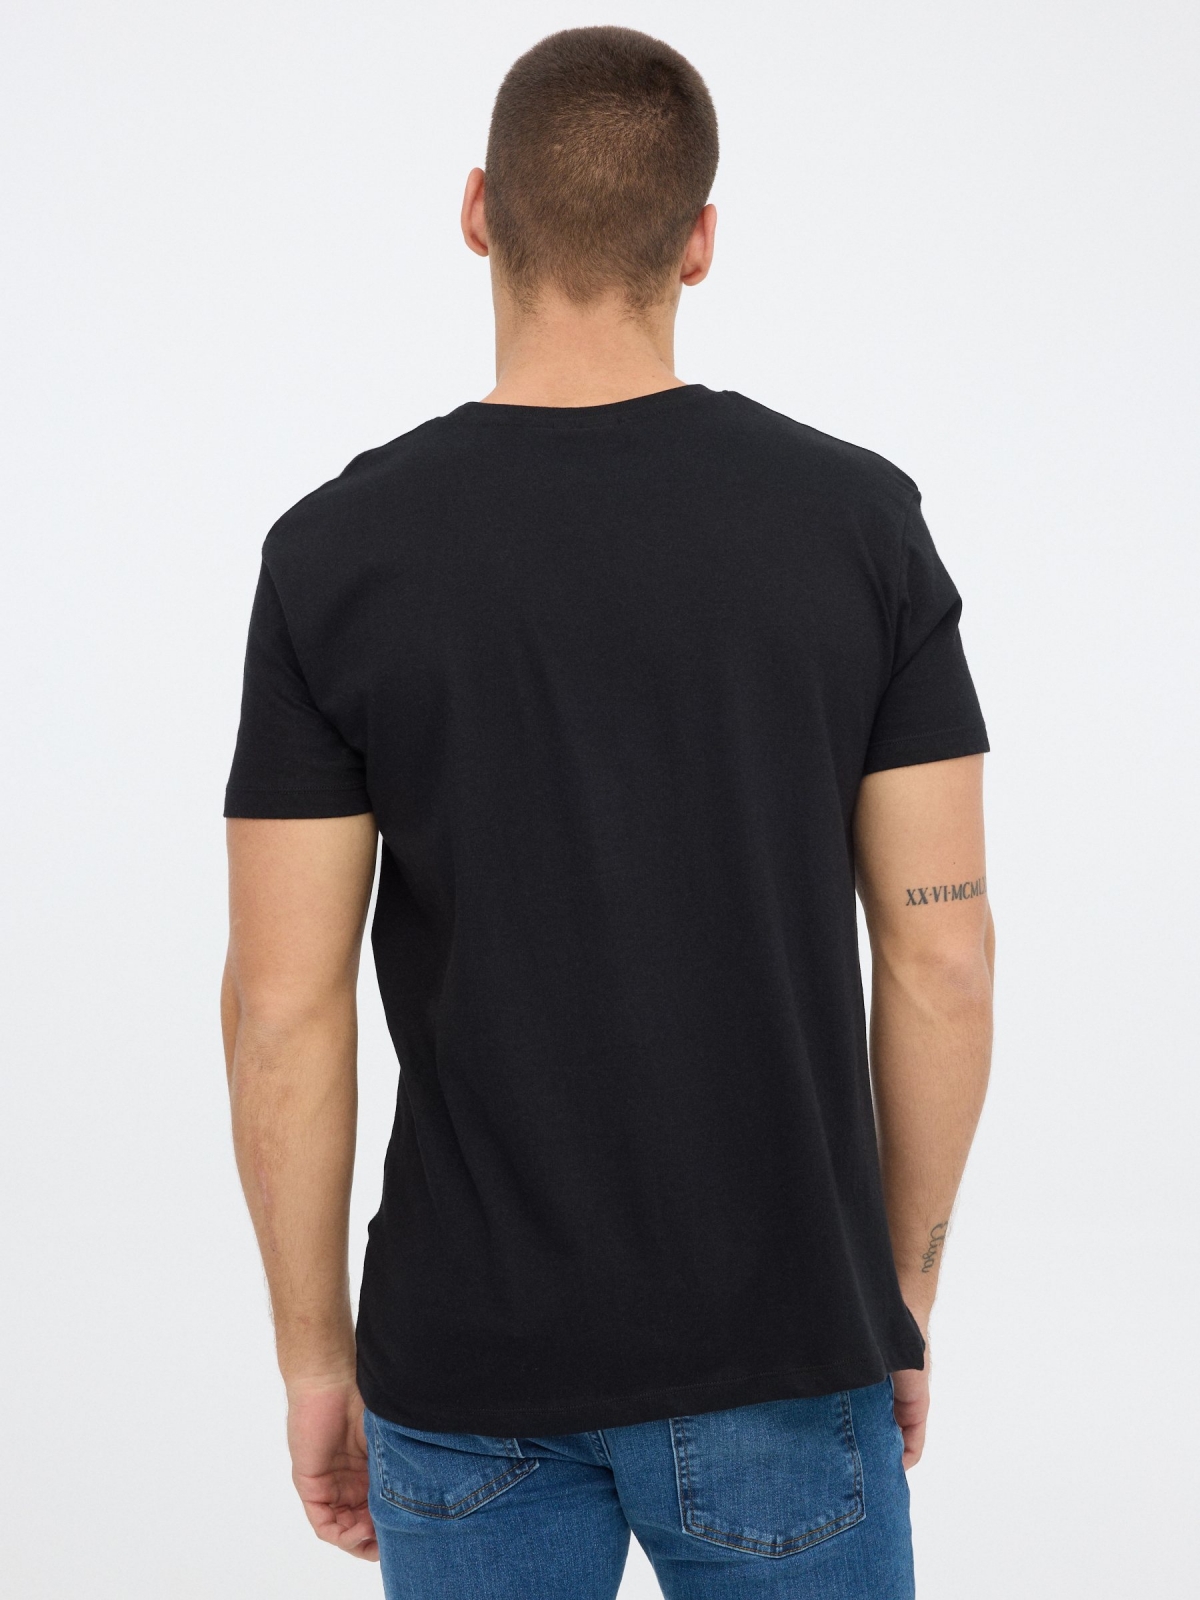 Mickey Mouse t-shirt black middle back view